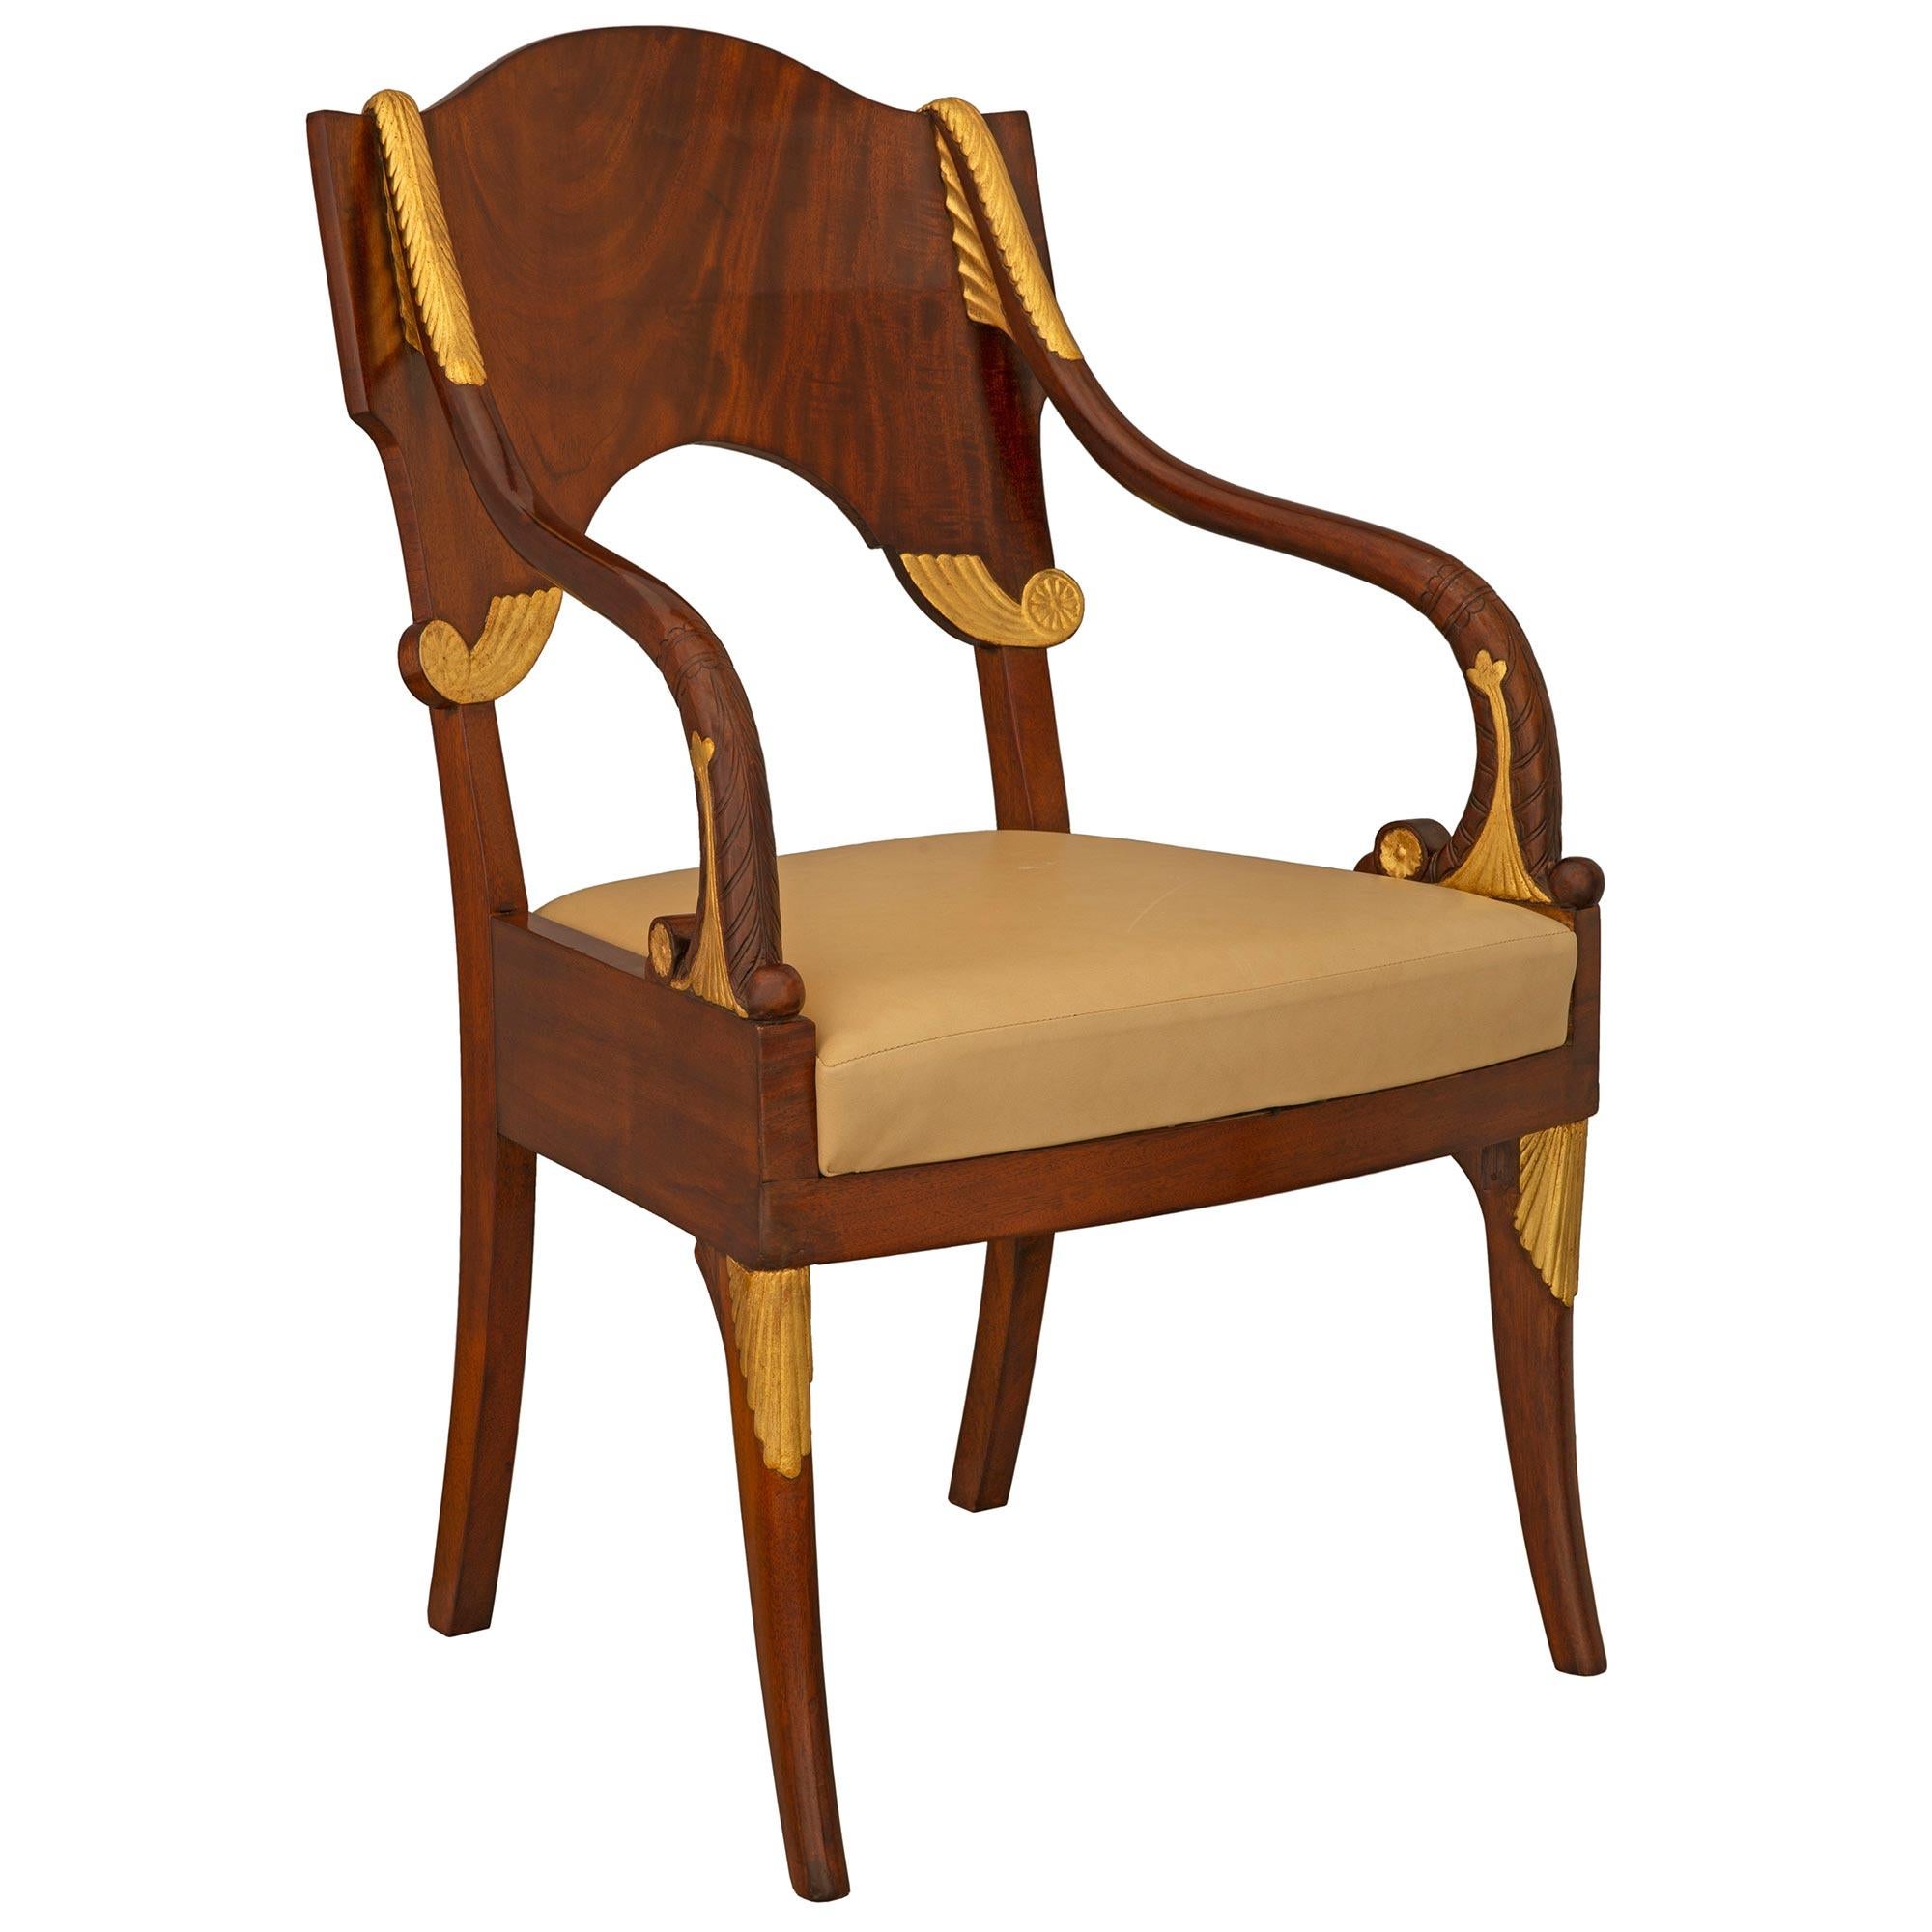 An exceptional and extremely unique pair of Russian mid 19th century neo-classical st. Mahogany and giltwood armchairs. Each chair is raised by elegantly curved legs with beautiful giltwood foliate accents at each corner. The arms each display